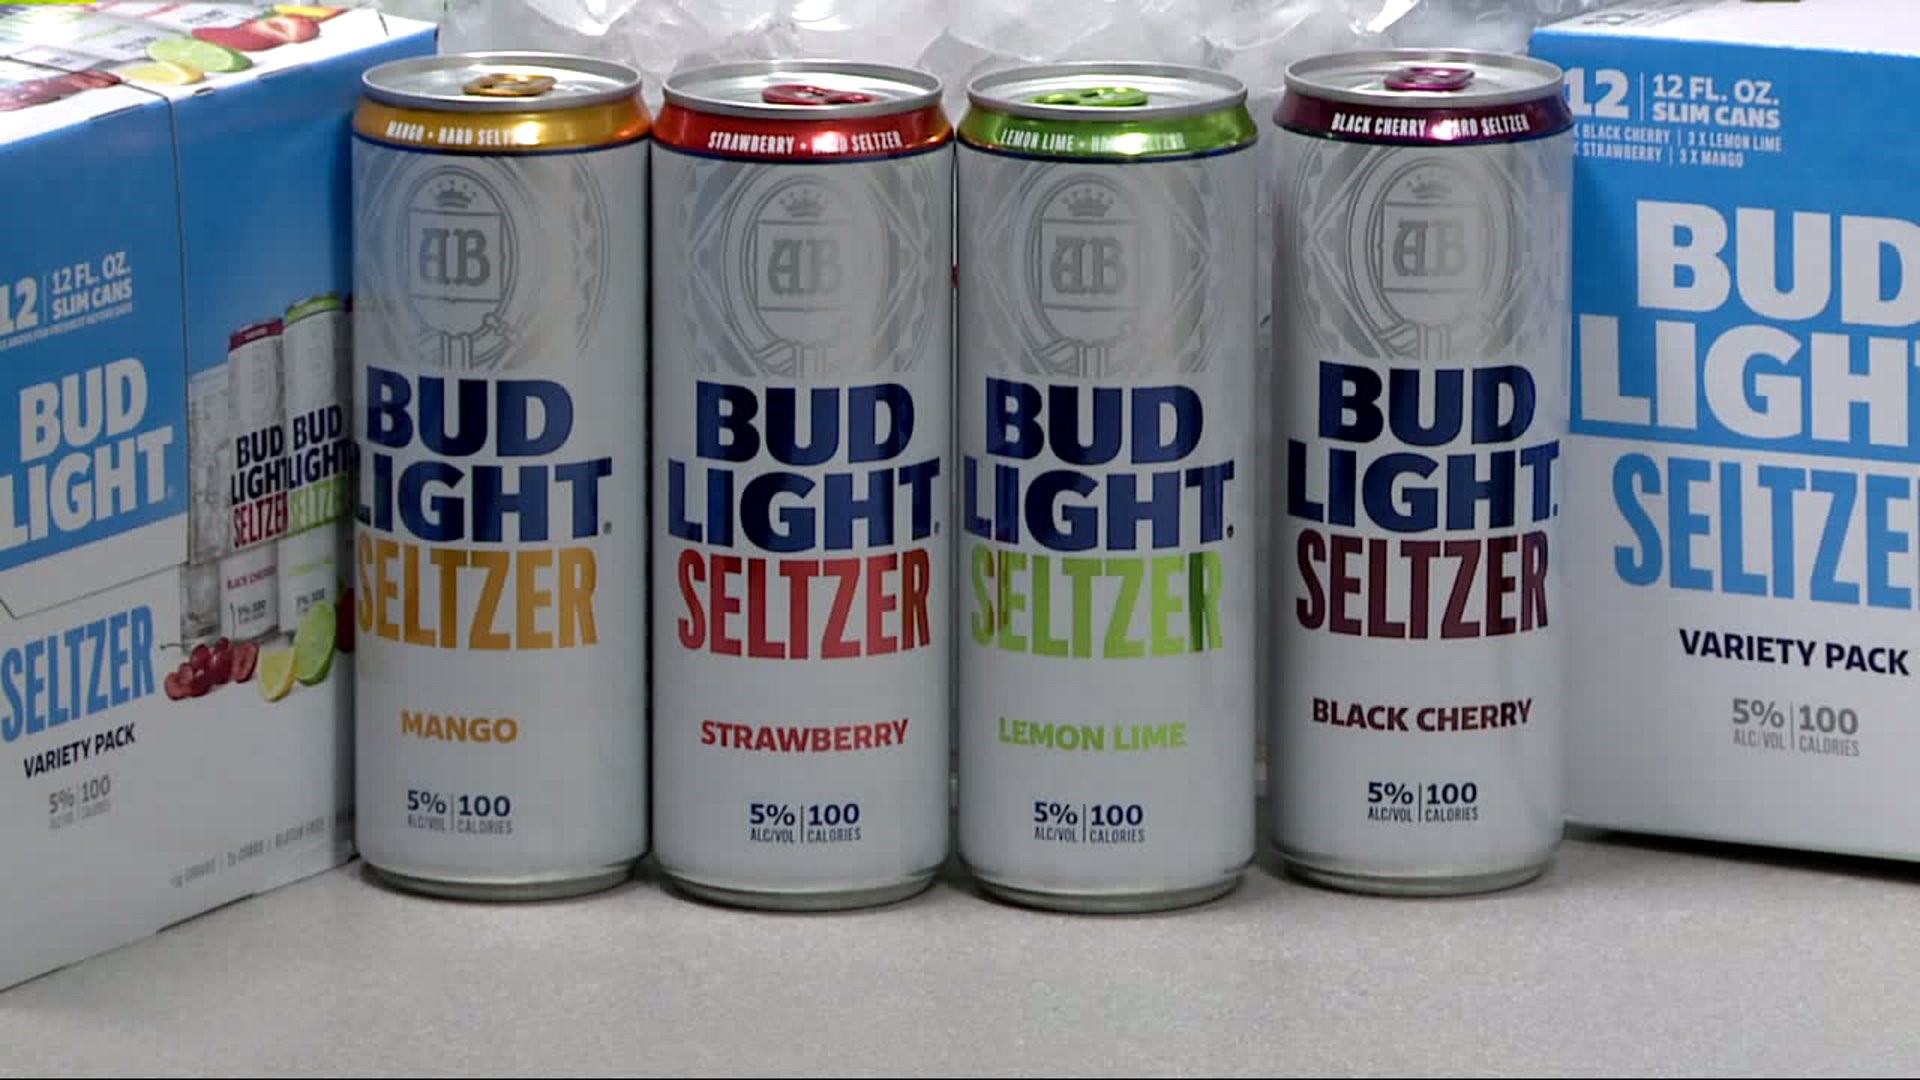 Brewery Products shows off new Bud Light Seltzers in the FOX43 Kitchen